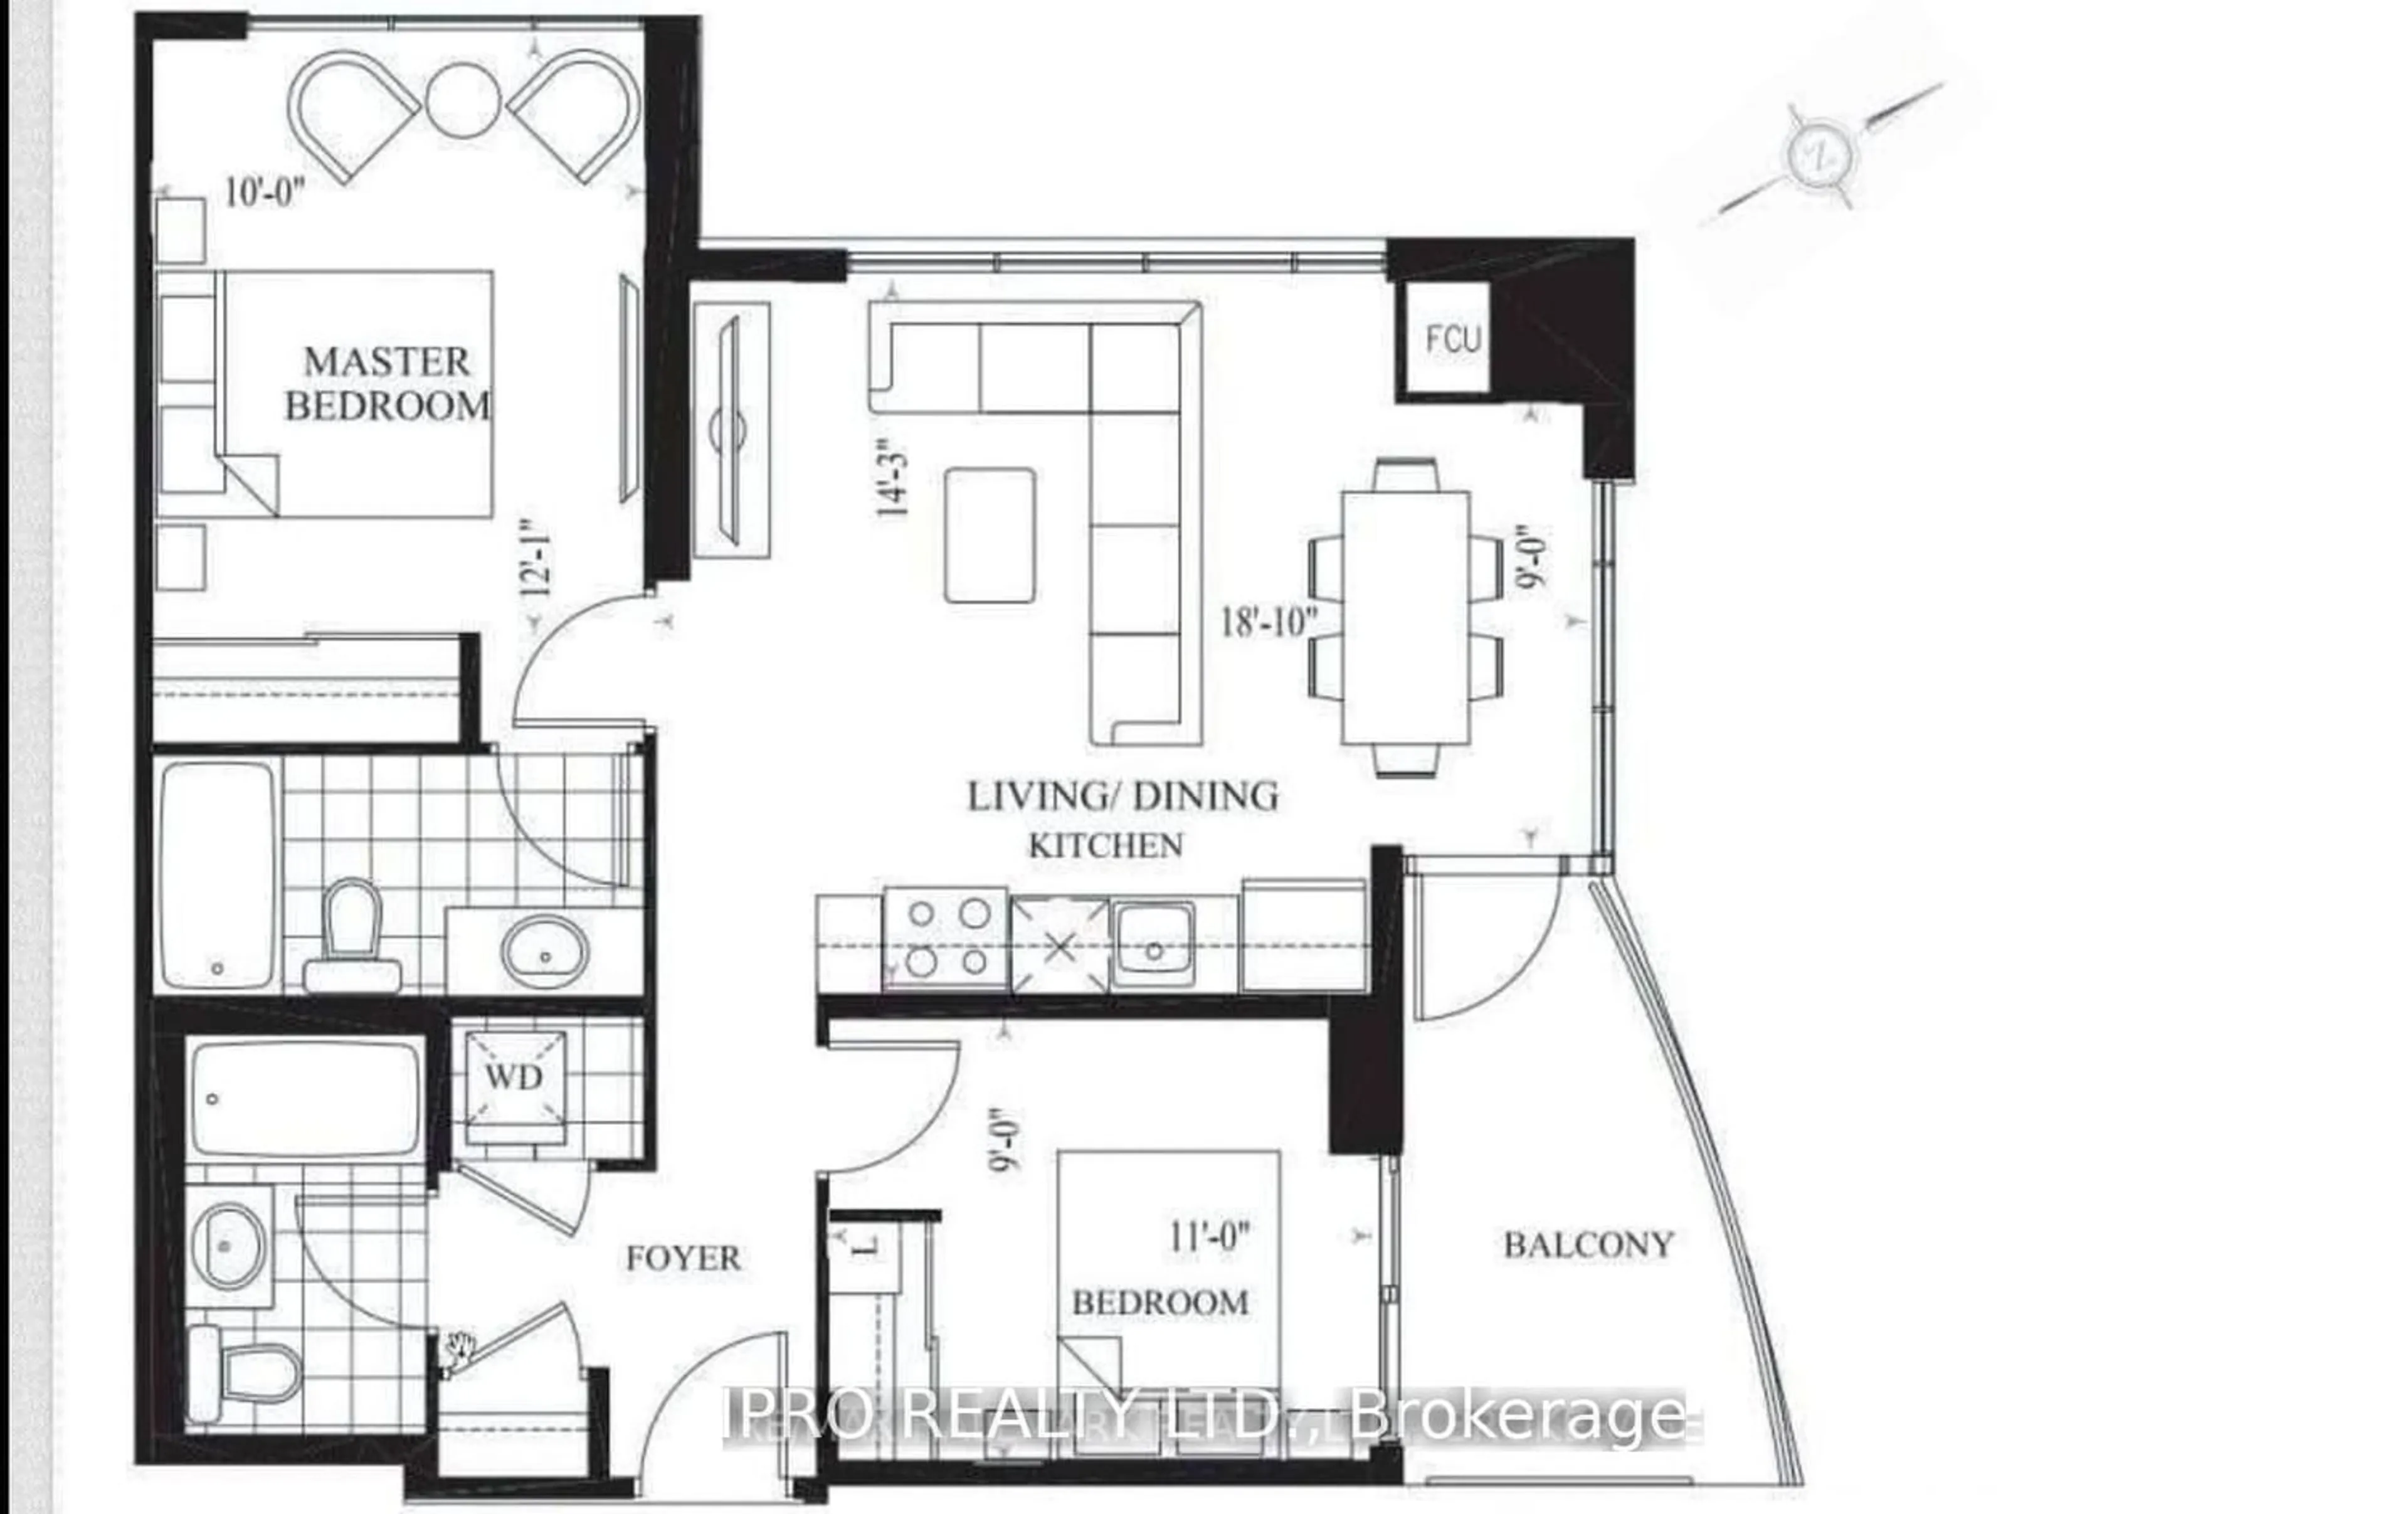 Floor plan for 2150 Lawrence Ave #1609, Toronto Ontario M1R 3A7